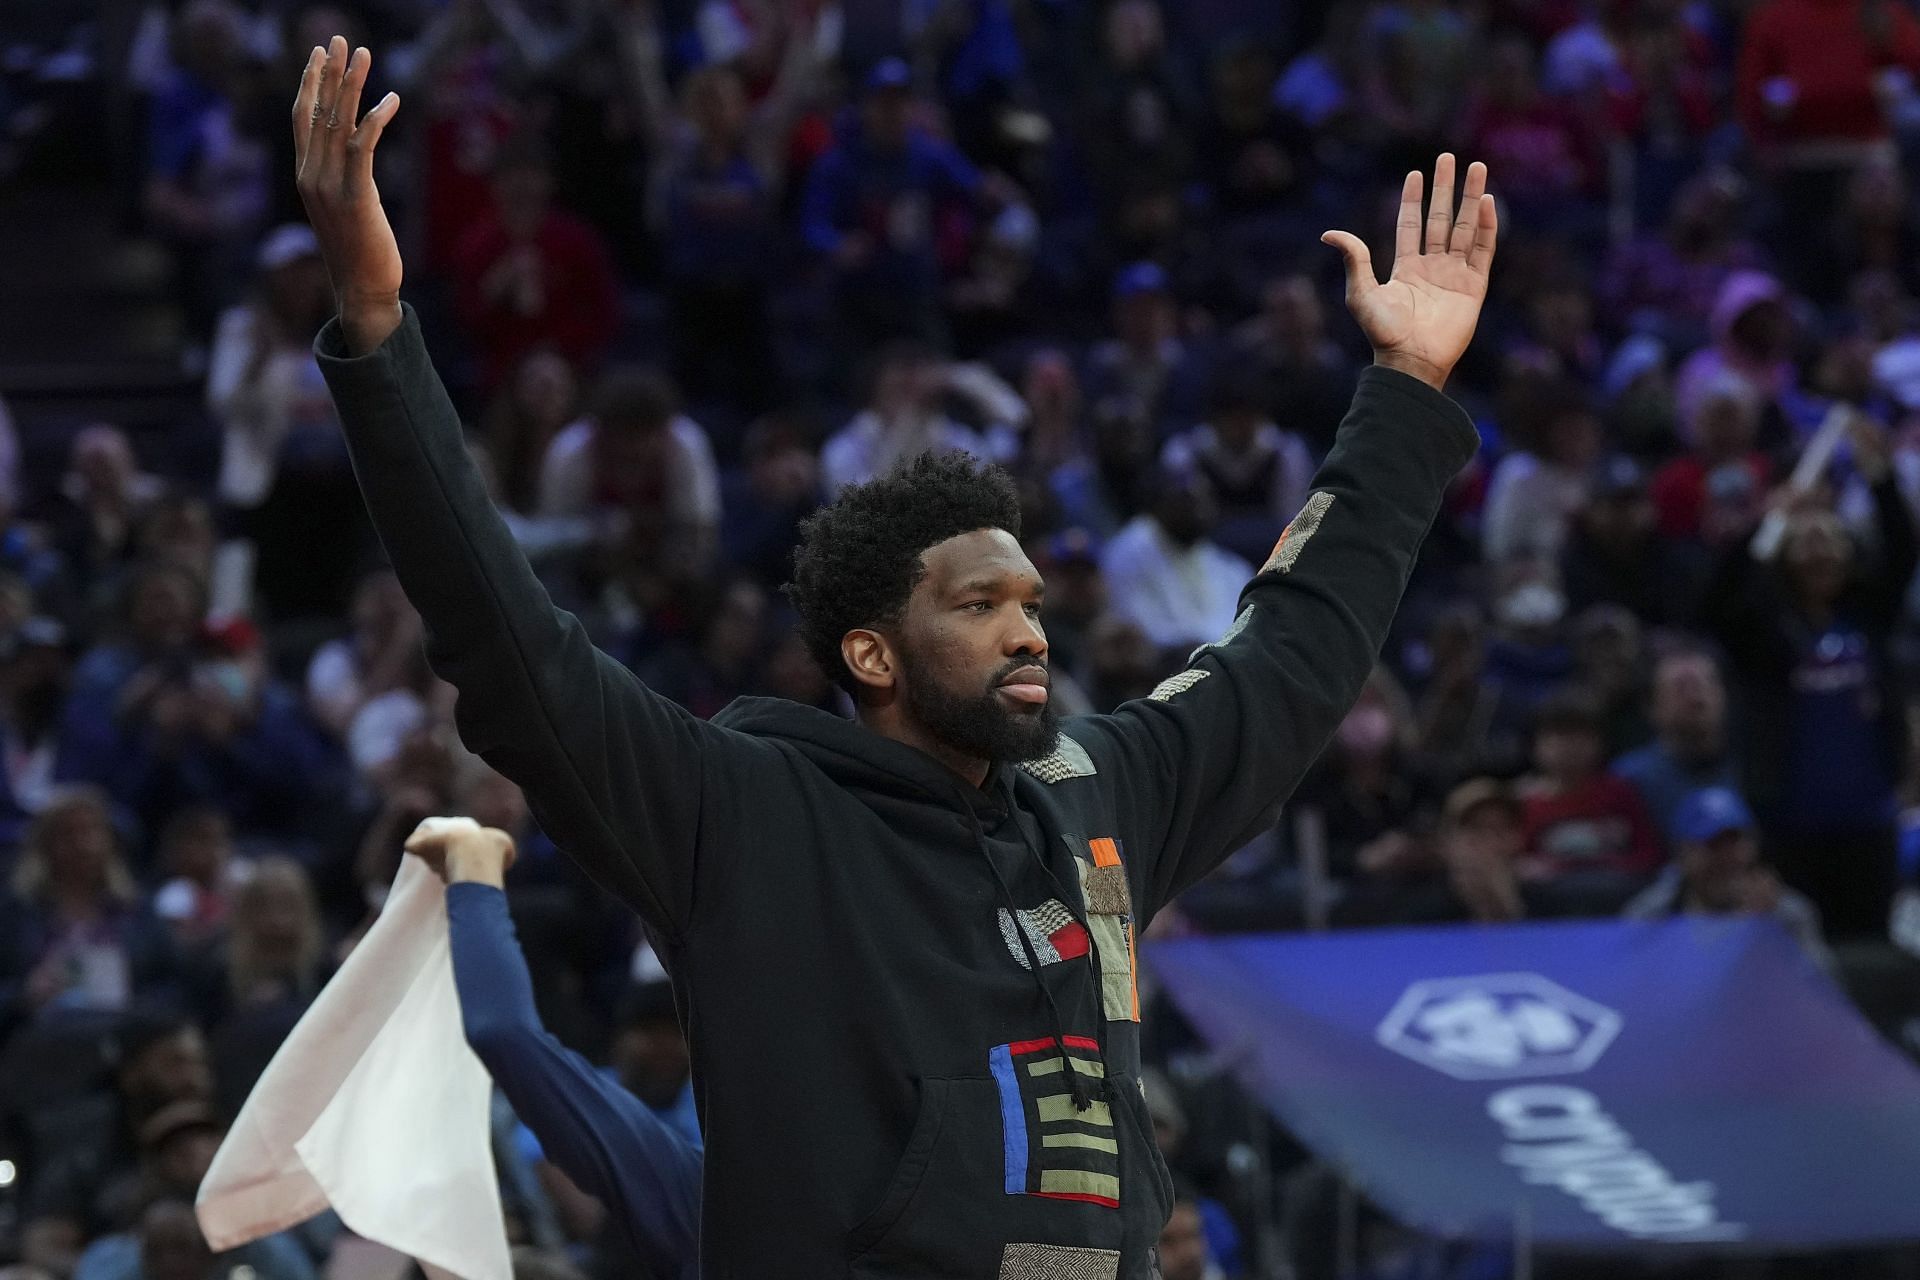 Embiid won this year&#039;s scoring title by averaging 30.6 points per game.